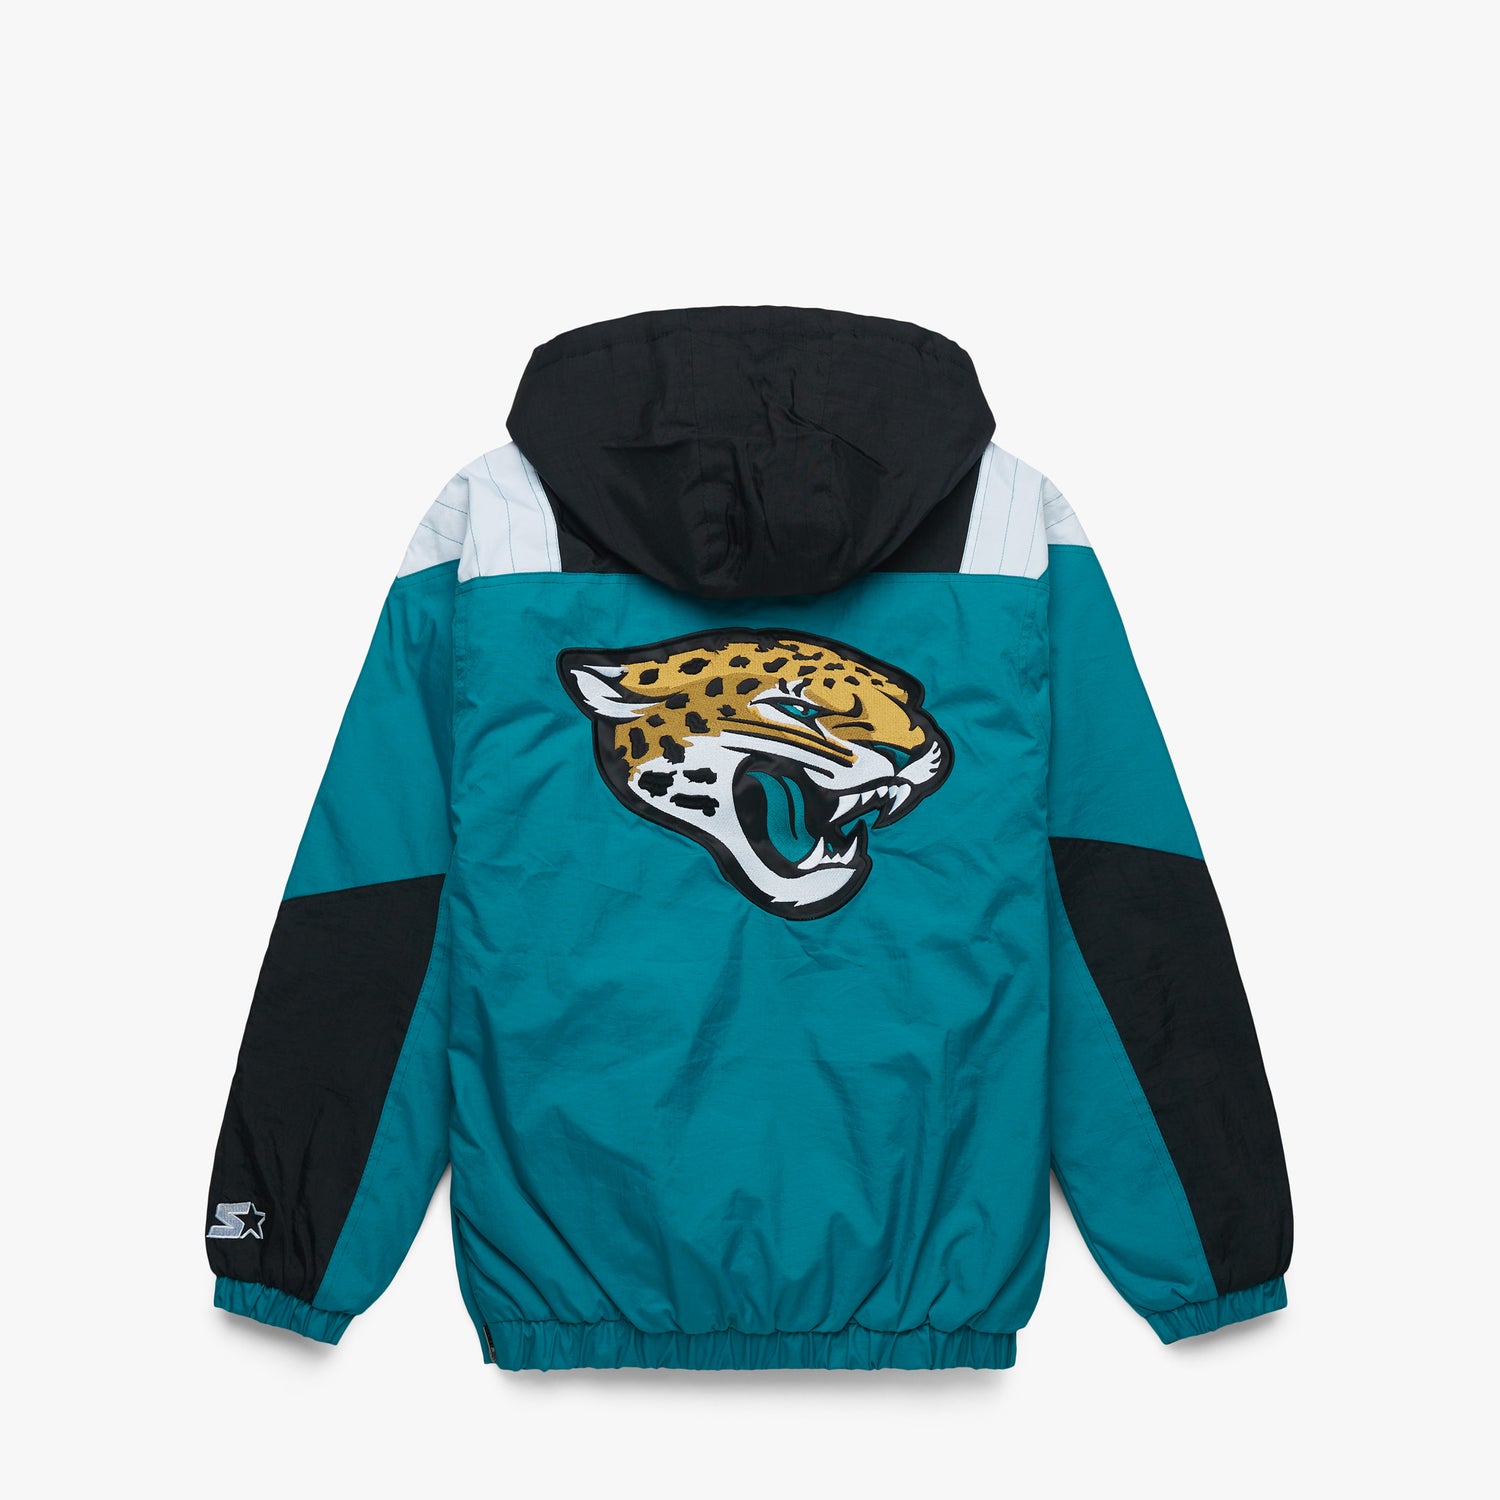 NFL UK on X: You can buy NFL jerseys, t-shirts, hoodies, jackets